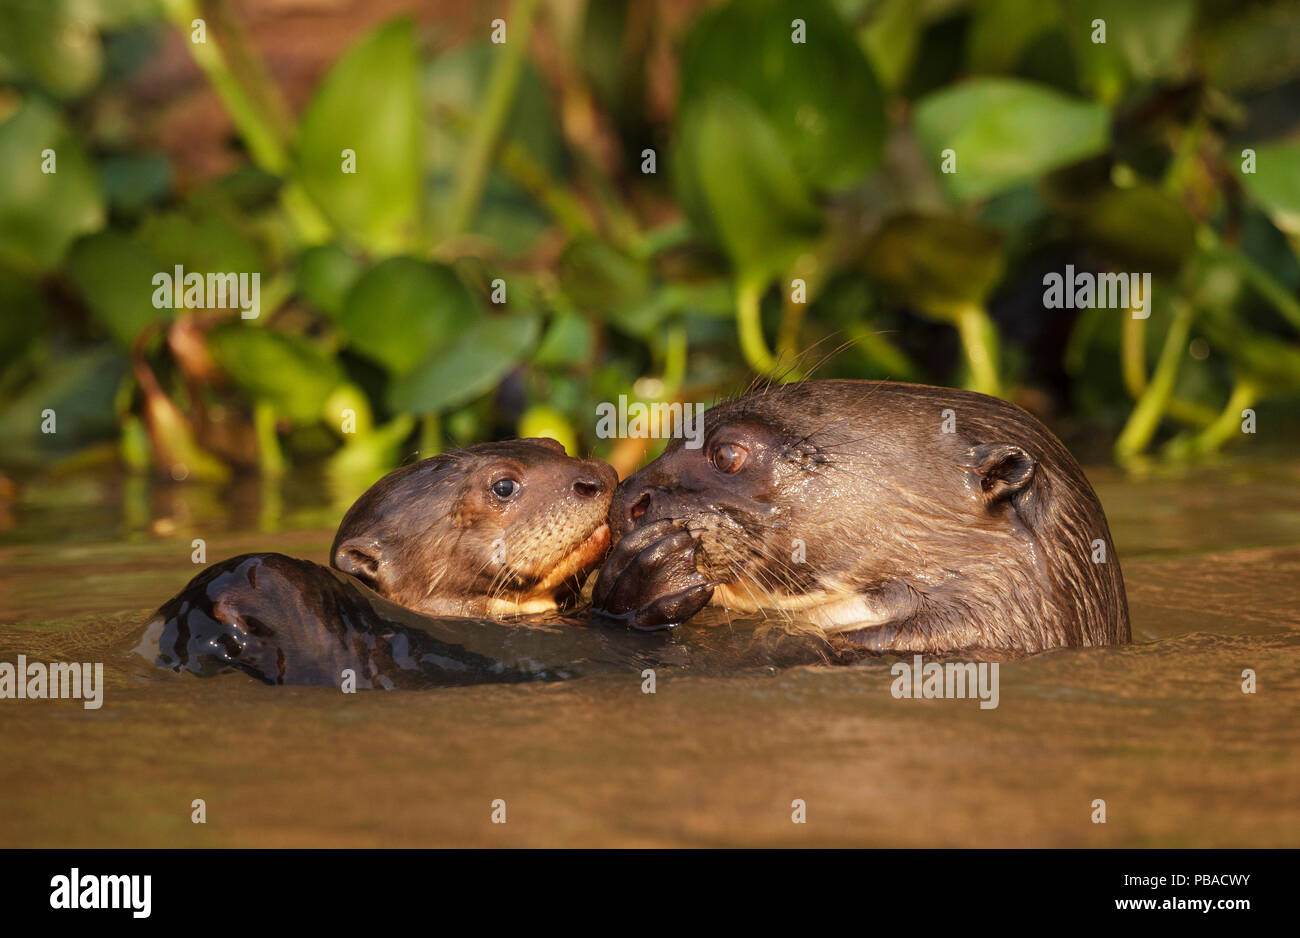 Giant Otter (Pteronura brasiliensis) adult with young in water, Pantanal, Brazil Stock Photo